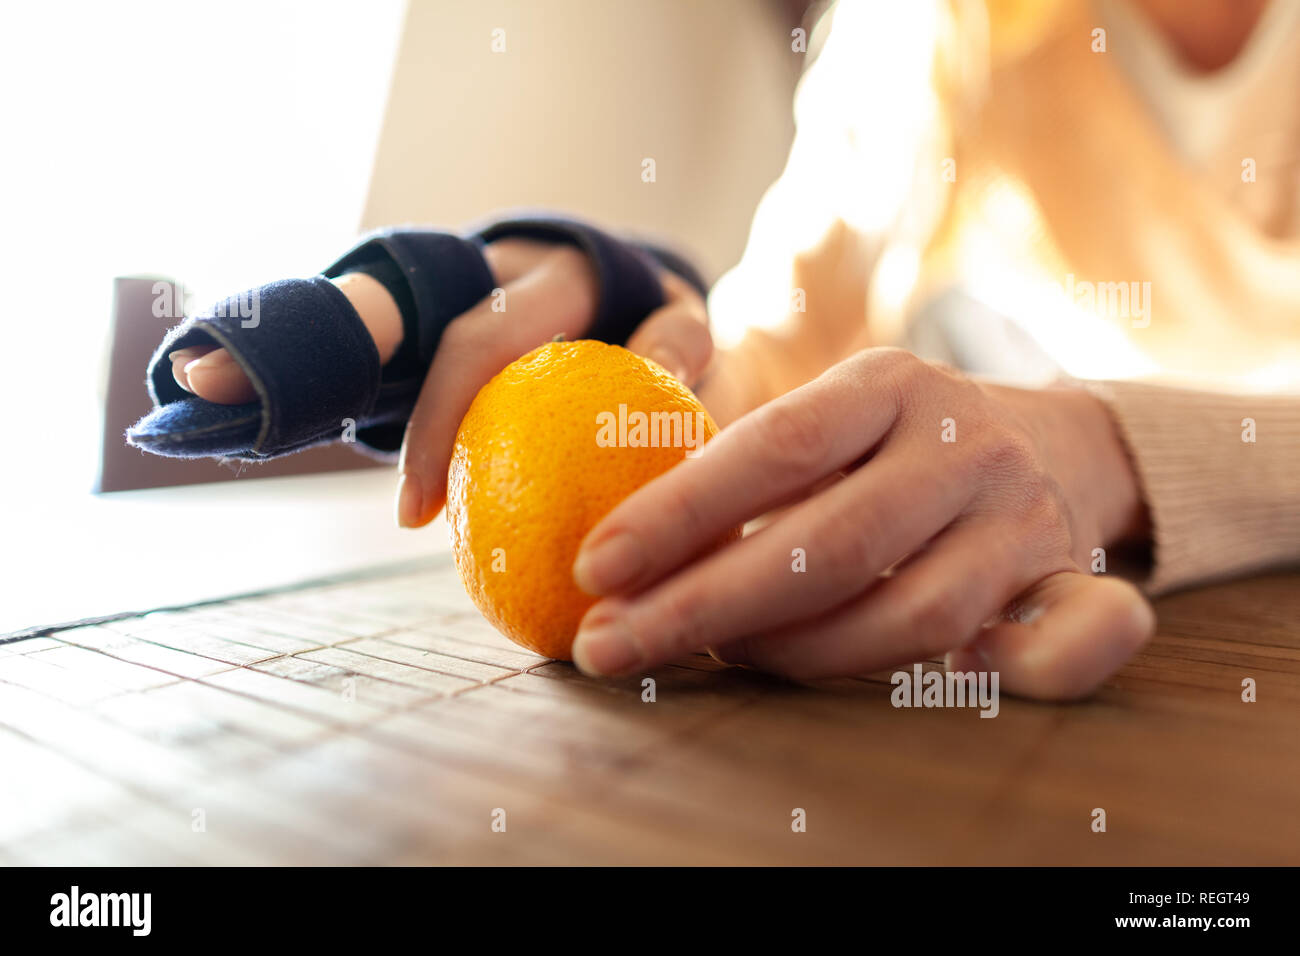 A hand peels an orange with a medical hand sling Stock Photo